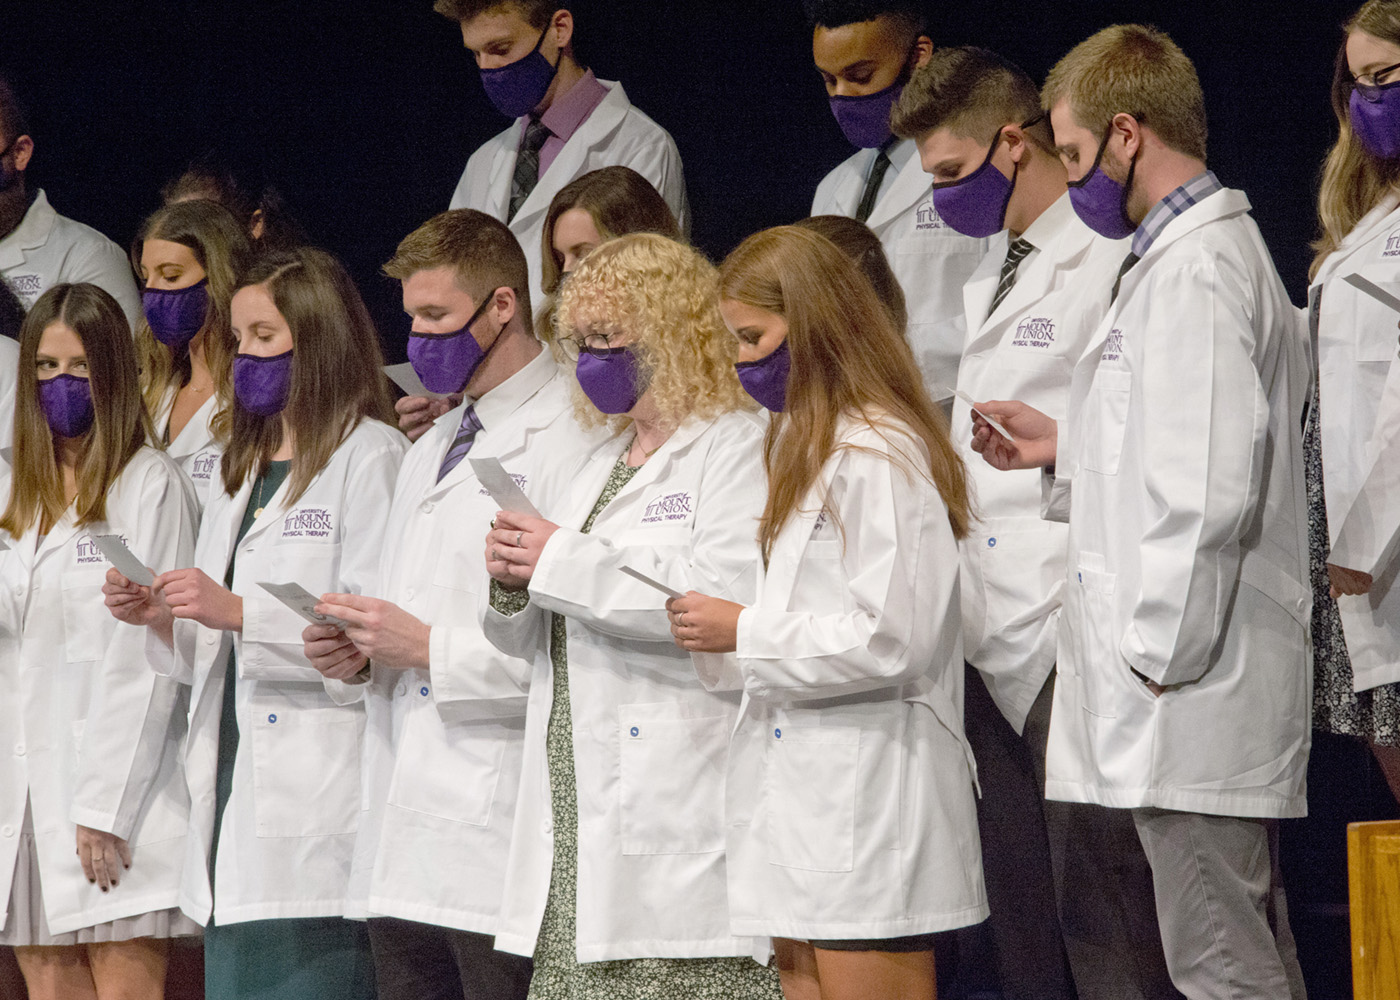 Students reading oath of the physical therapist at Mount Union's PT White Coat ceremony